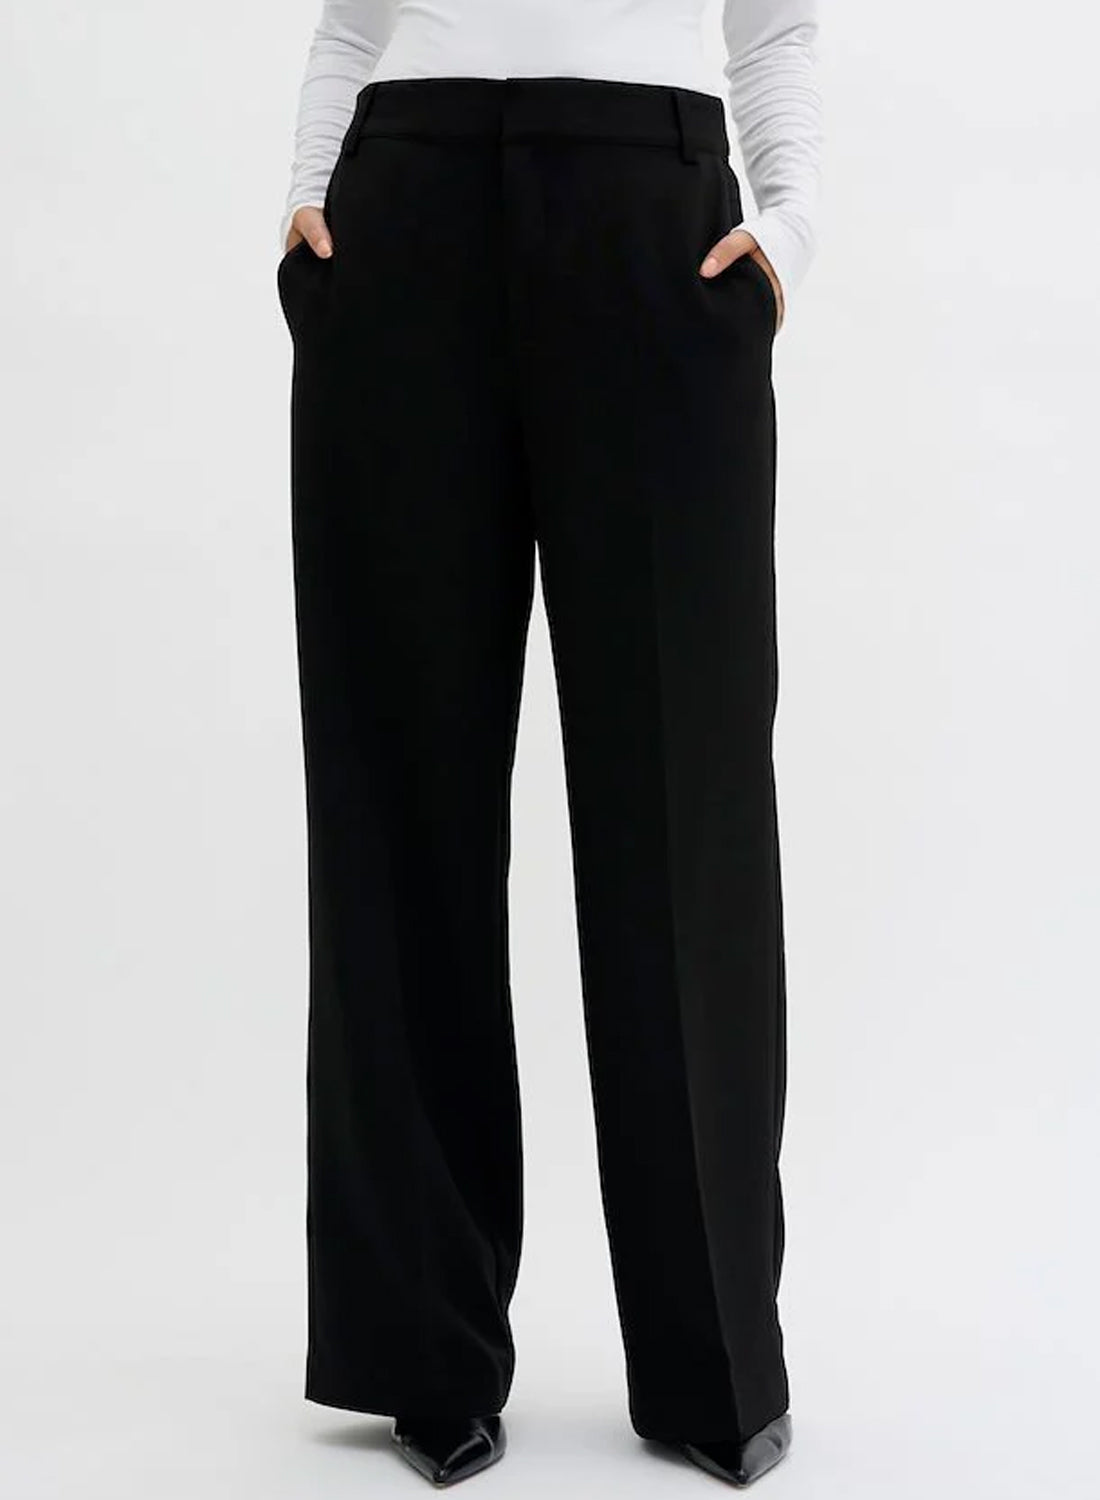 My Essential Wardrobe 29 The Tailored Pant Black